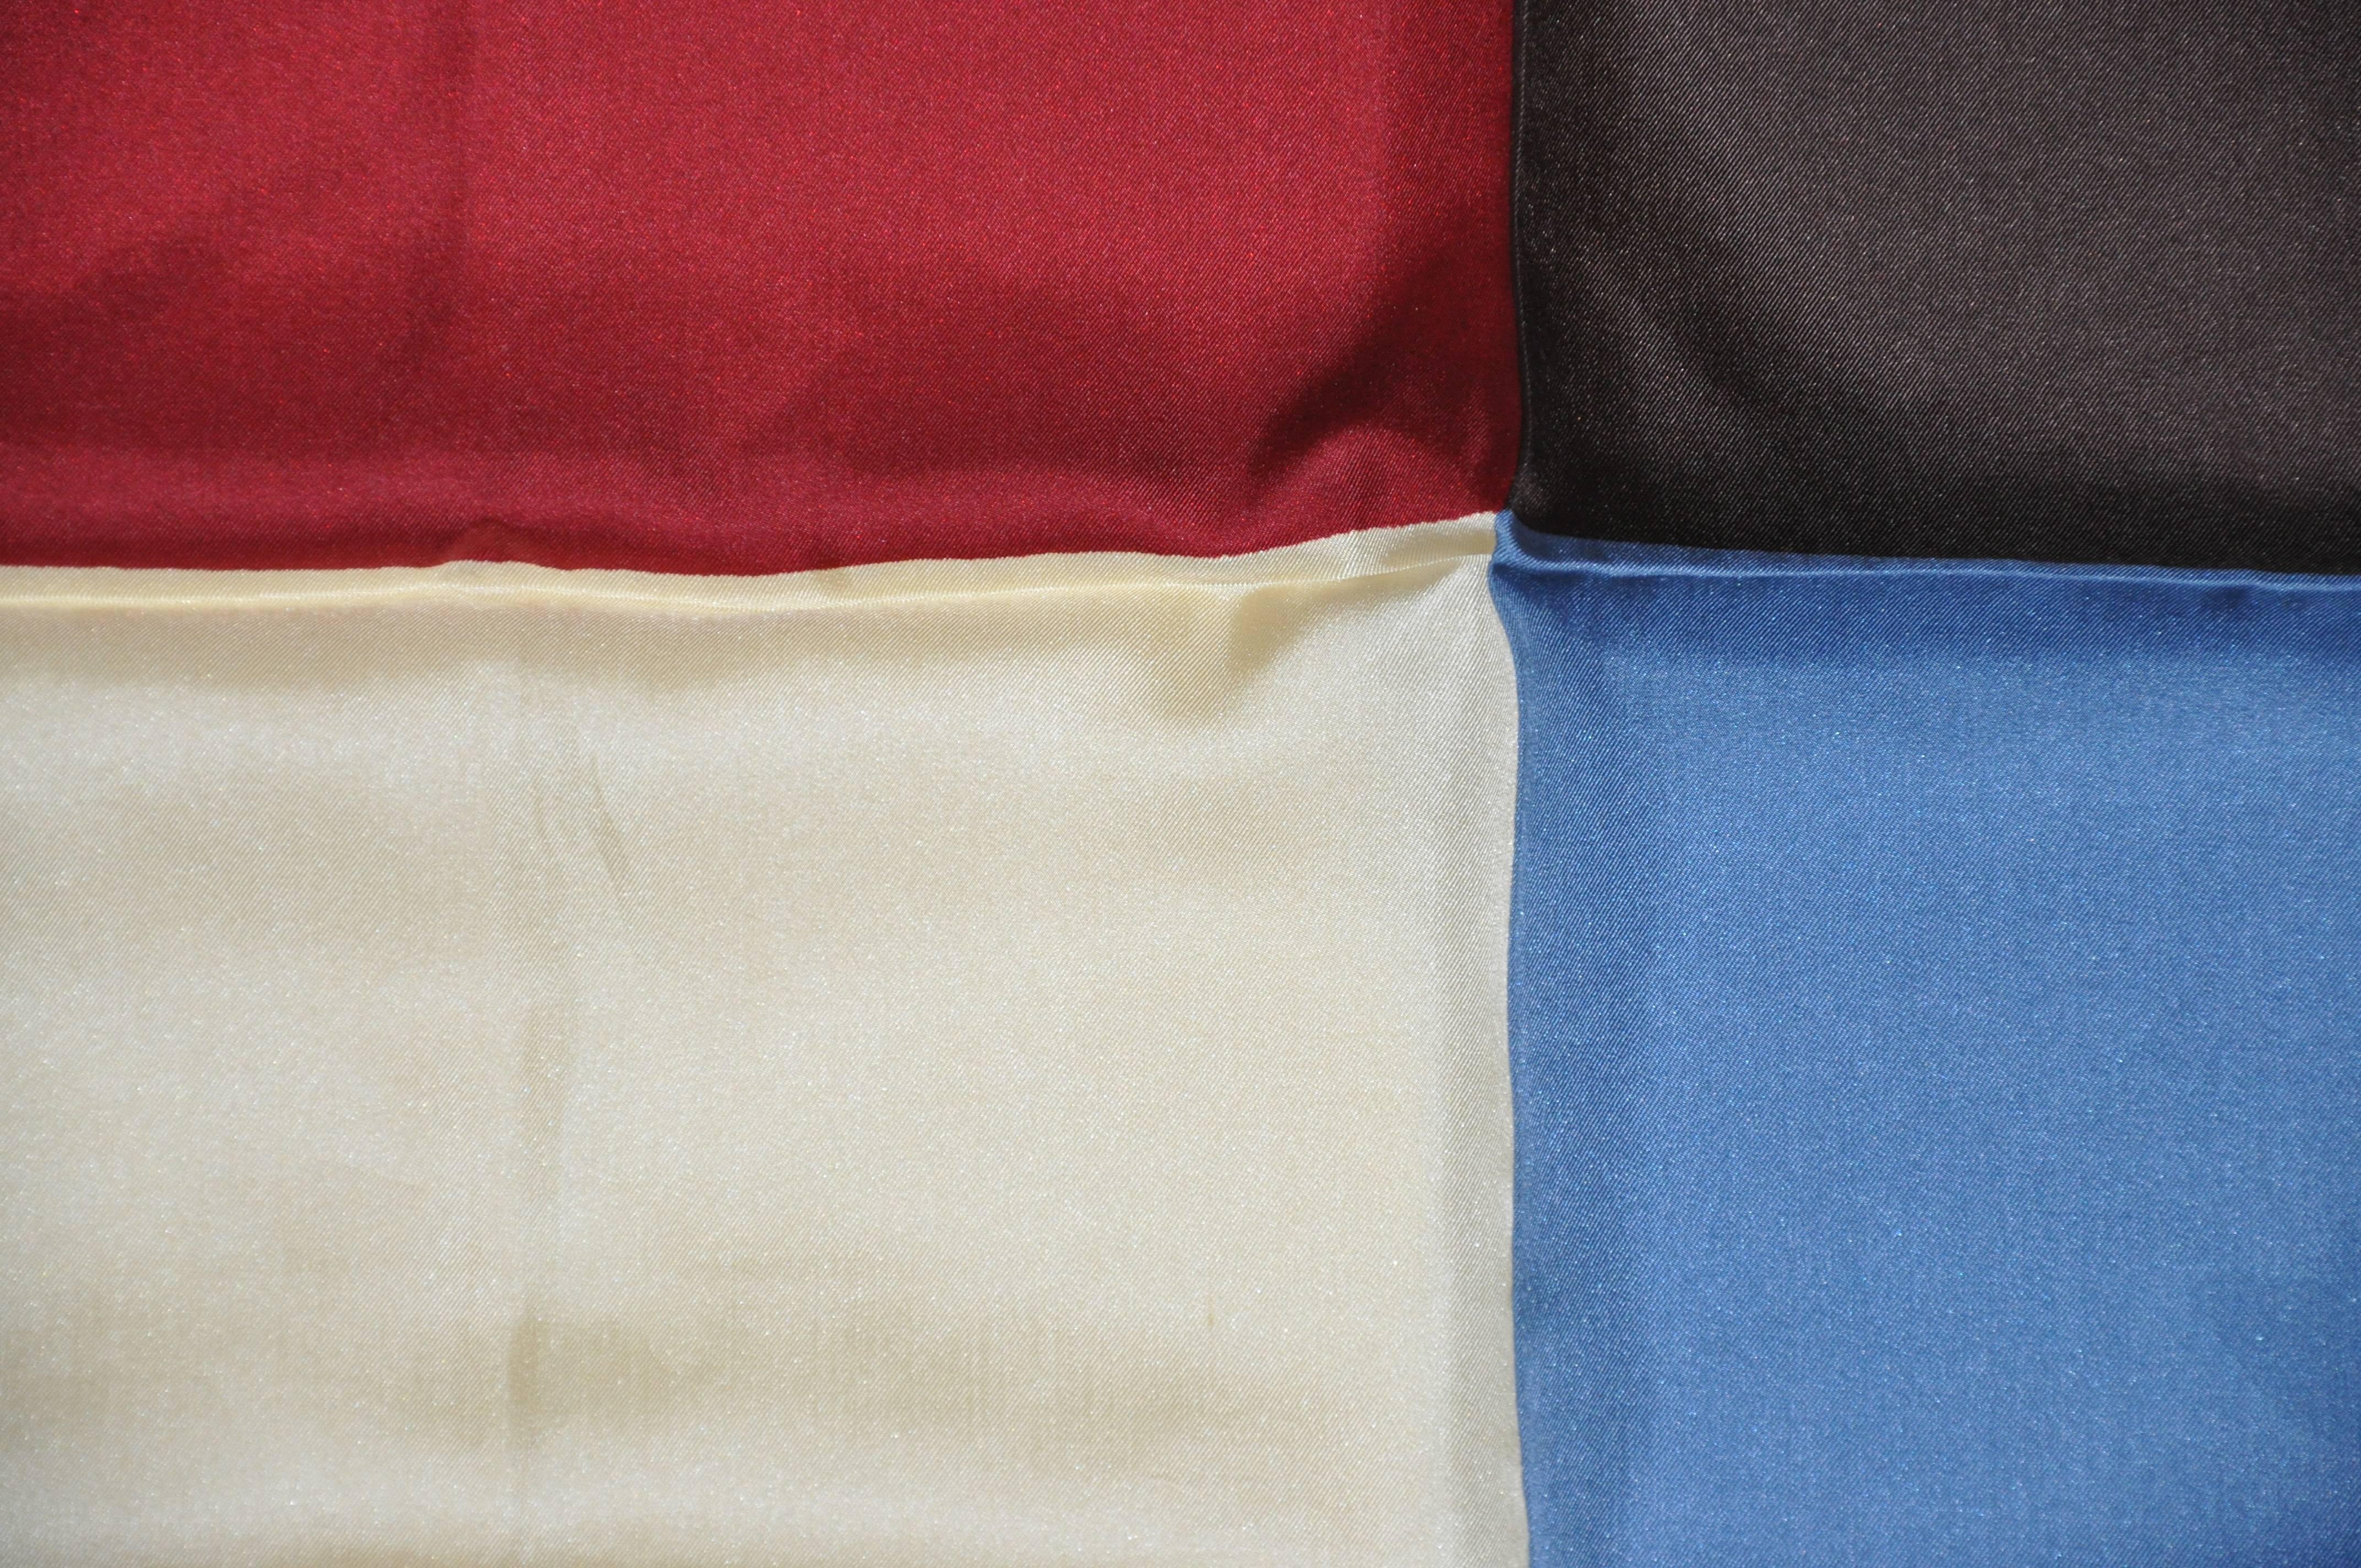 Bold burgundy, cream, blue and coco accented with black border men's silk handkerchief measures 19" x 19", finished with hand-rolled edges. Made in Italy.